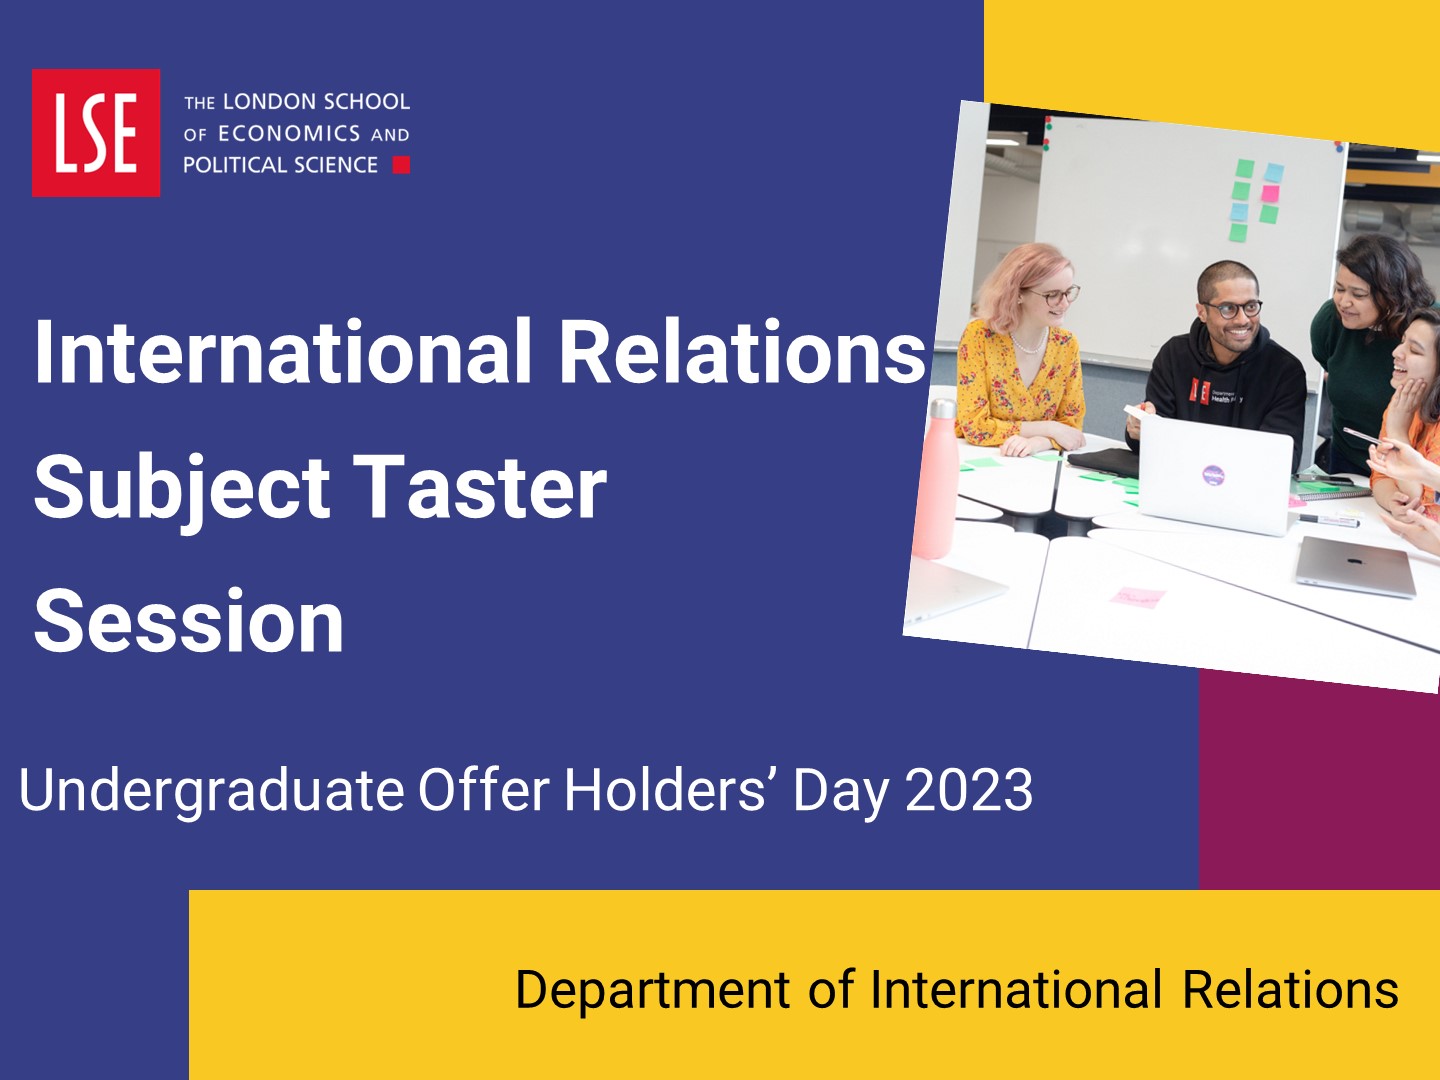 Watch the international relations subject taster session